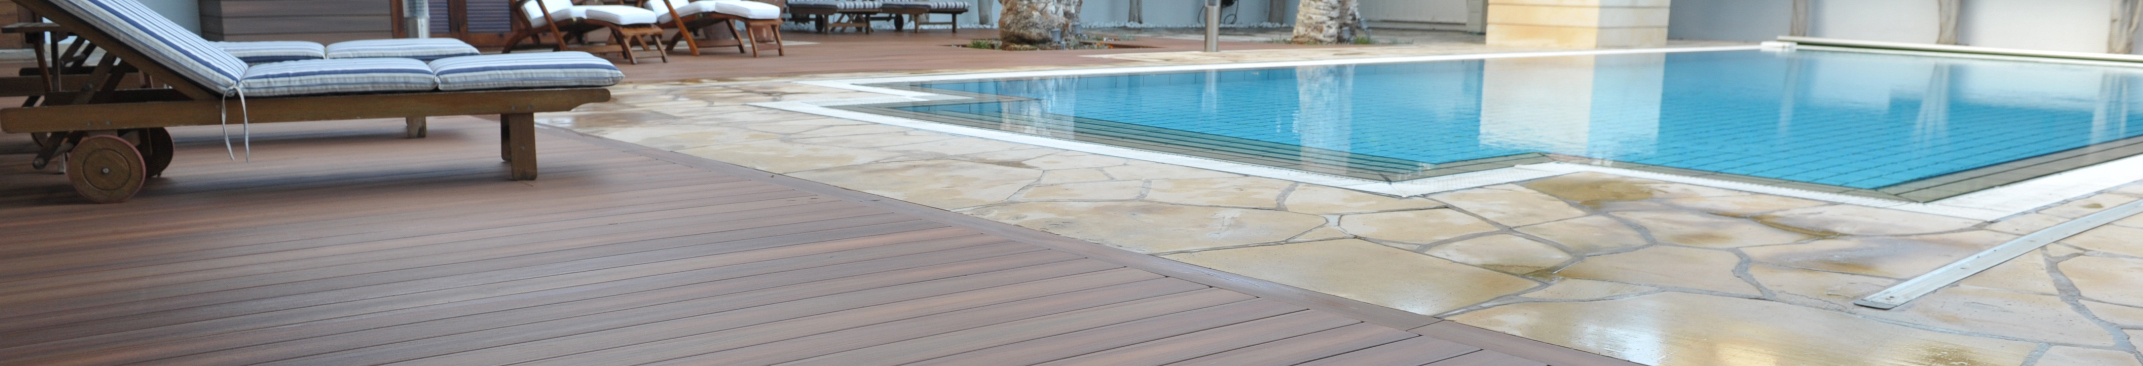 Problems with Decking – Common things to look for